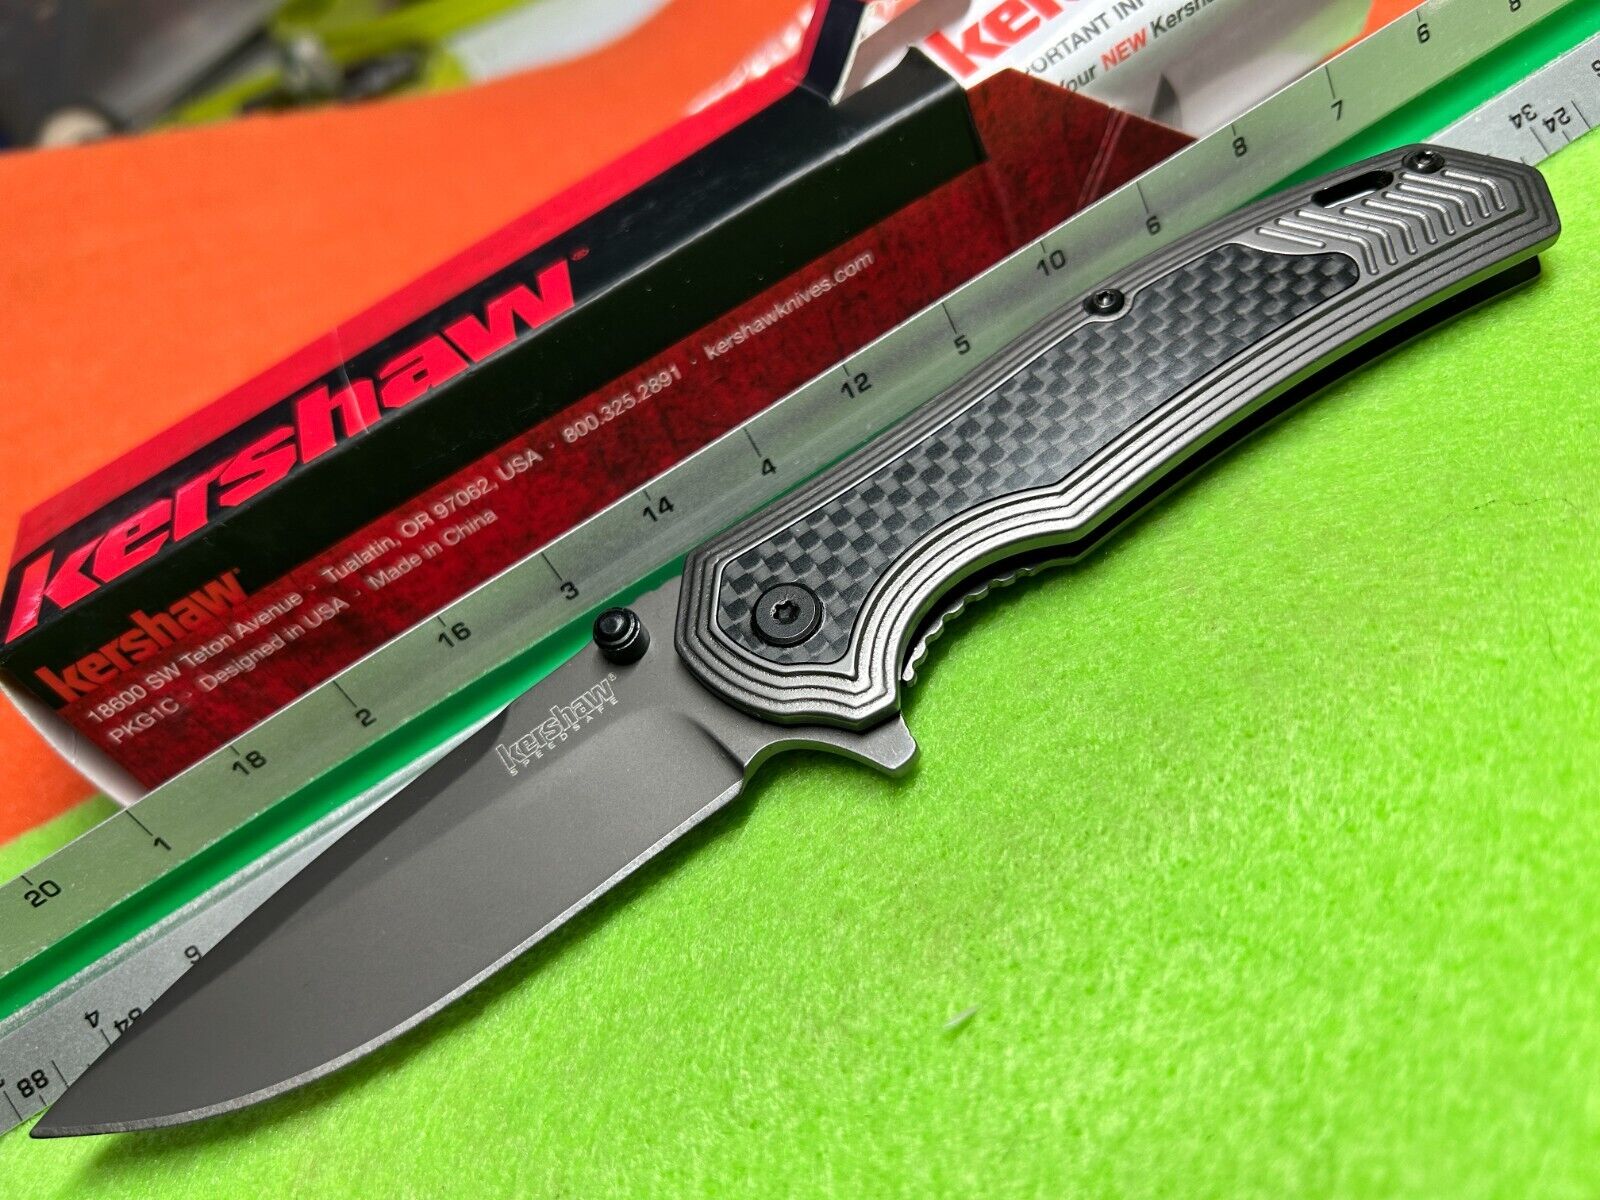 Kershaw Fringe 8310 Stainless Steel Knife with Carbon Fiber insert - NEW IN BOX